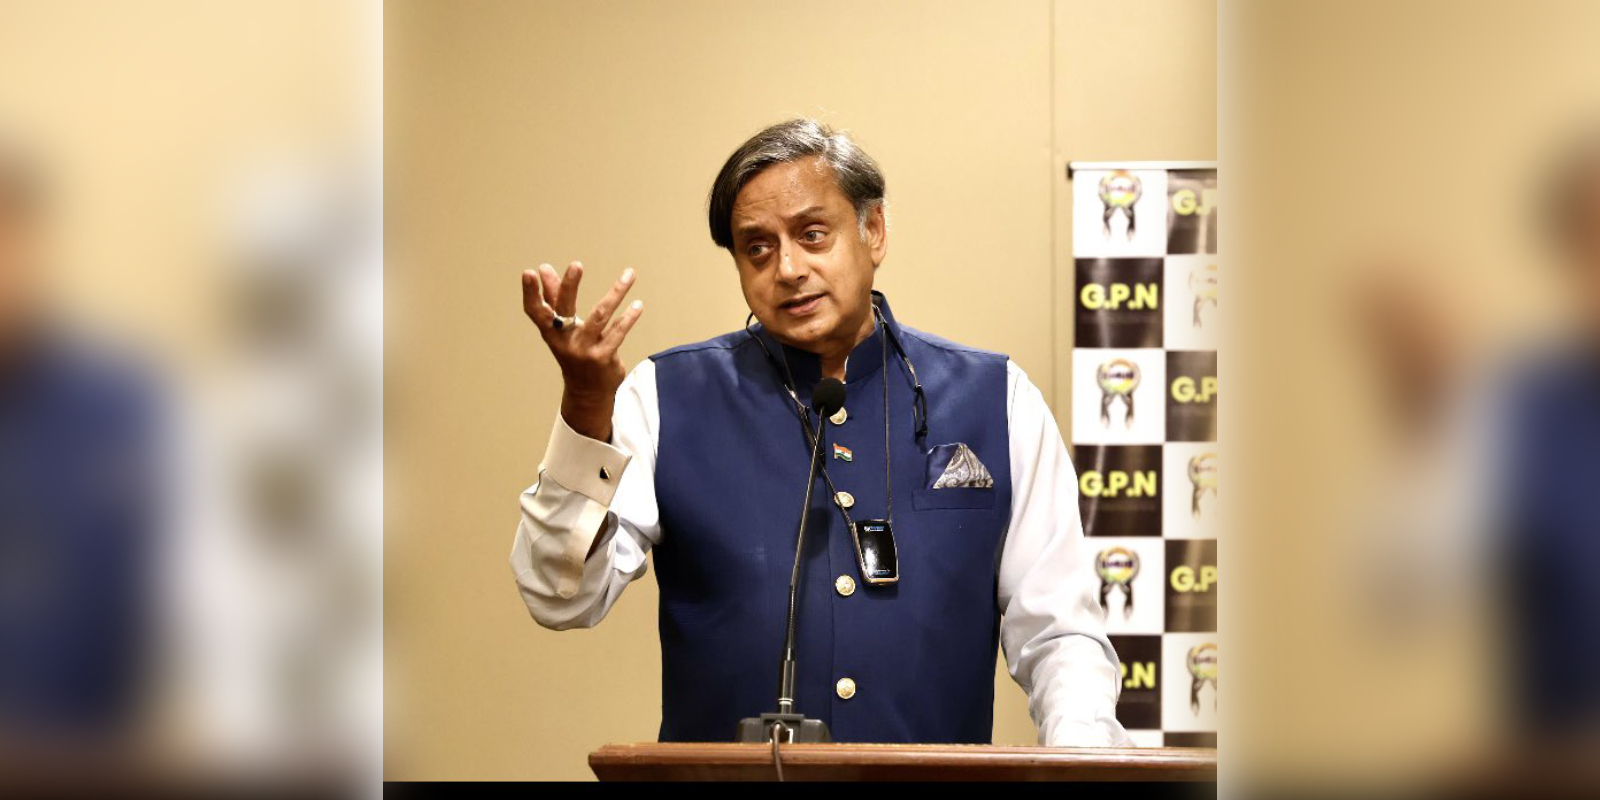 Congress MP Shashi Tharoor speaks about the Manipur voilence